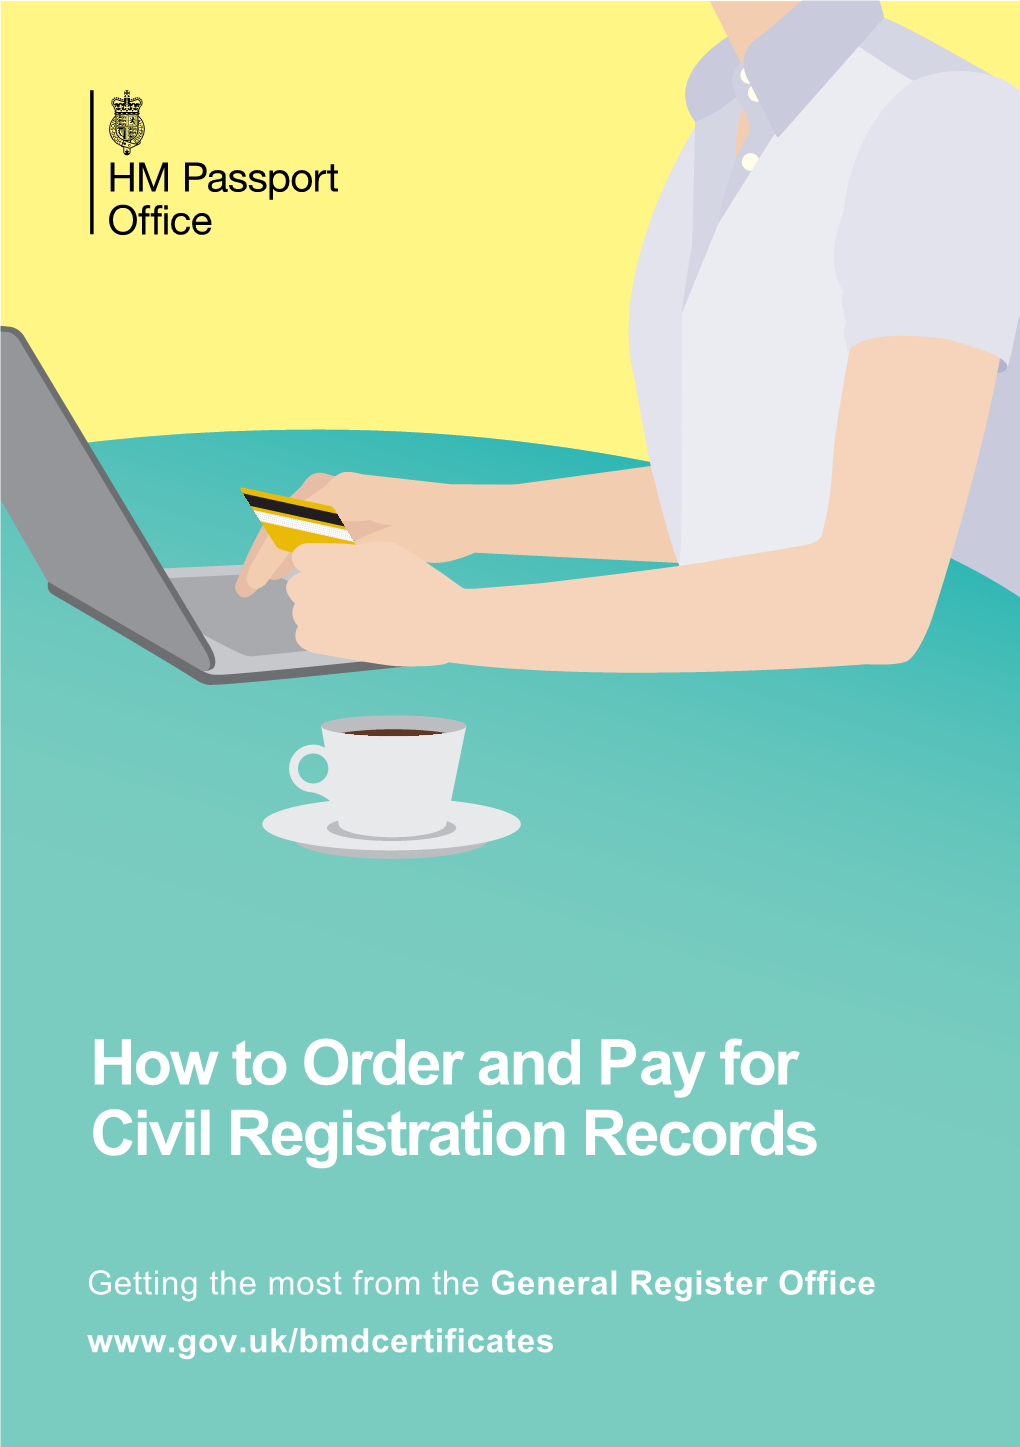 How to Order and Pay for Civil Registration Records